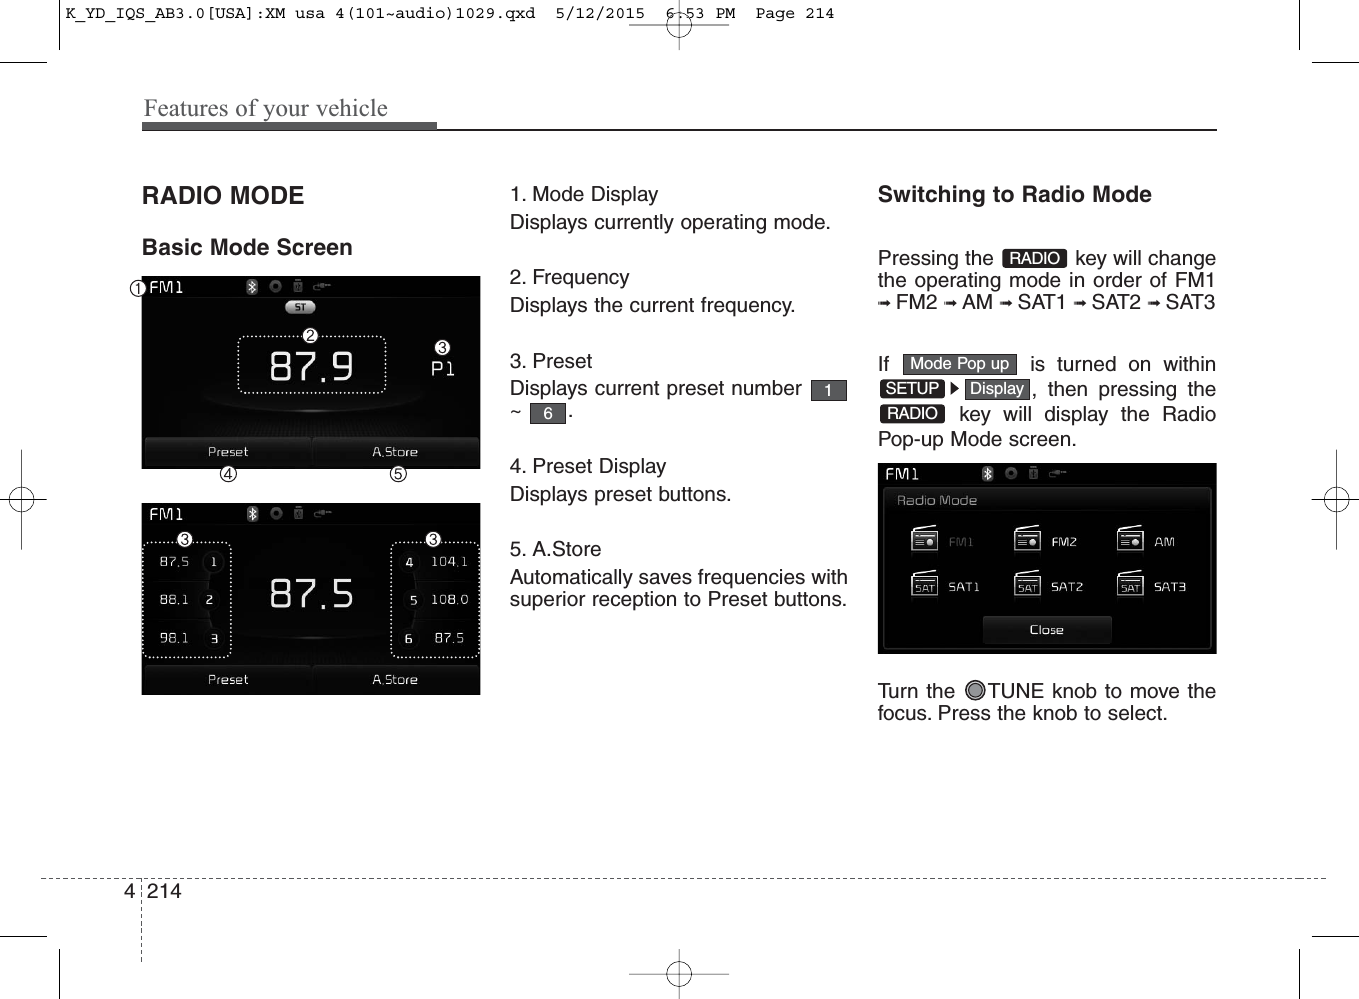 Features of your vehicle2144RADIO MODEBasic Mode Screen1. Mode DisplayDisplays currently operating mode.2. FrequencyDisplays the current frequency.3. PresetDisplays current preset number~.4. Preset DisplayDisplays preset buttons.5. A.StoreAutomatically saves frequencies withsuperior reception to Preset buttons.Switching to Radio ModePressing the  key will changethe operating mode in order of FM1➟ FM2 ➟ AM ➟ SAT1 ➟ SAT2 ➟ SAT3If  is turned on within, then pressing thekey will display the RadioPop-up Mode screen.Turn the  TUNE knob to move thefocus. Press the knob to select.RADIODisplaySETUPMode Pop upRADIO61K_YD_IQS_AB3.0[USA]:XM usa 4(101~audio)1029.qxd  5/12/2015  6:53 PM  Page 214